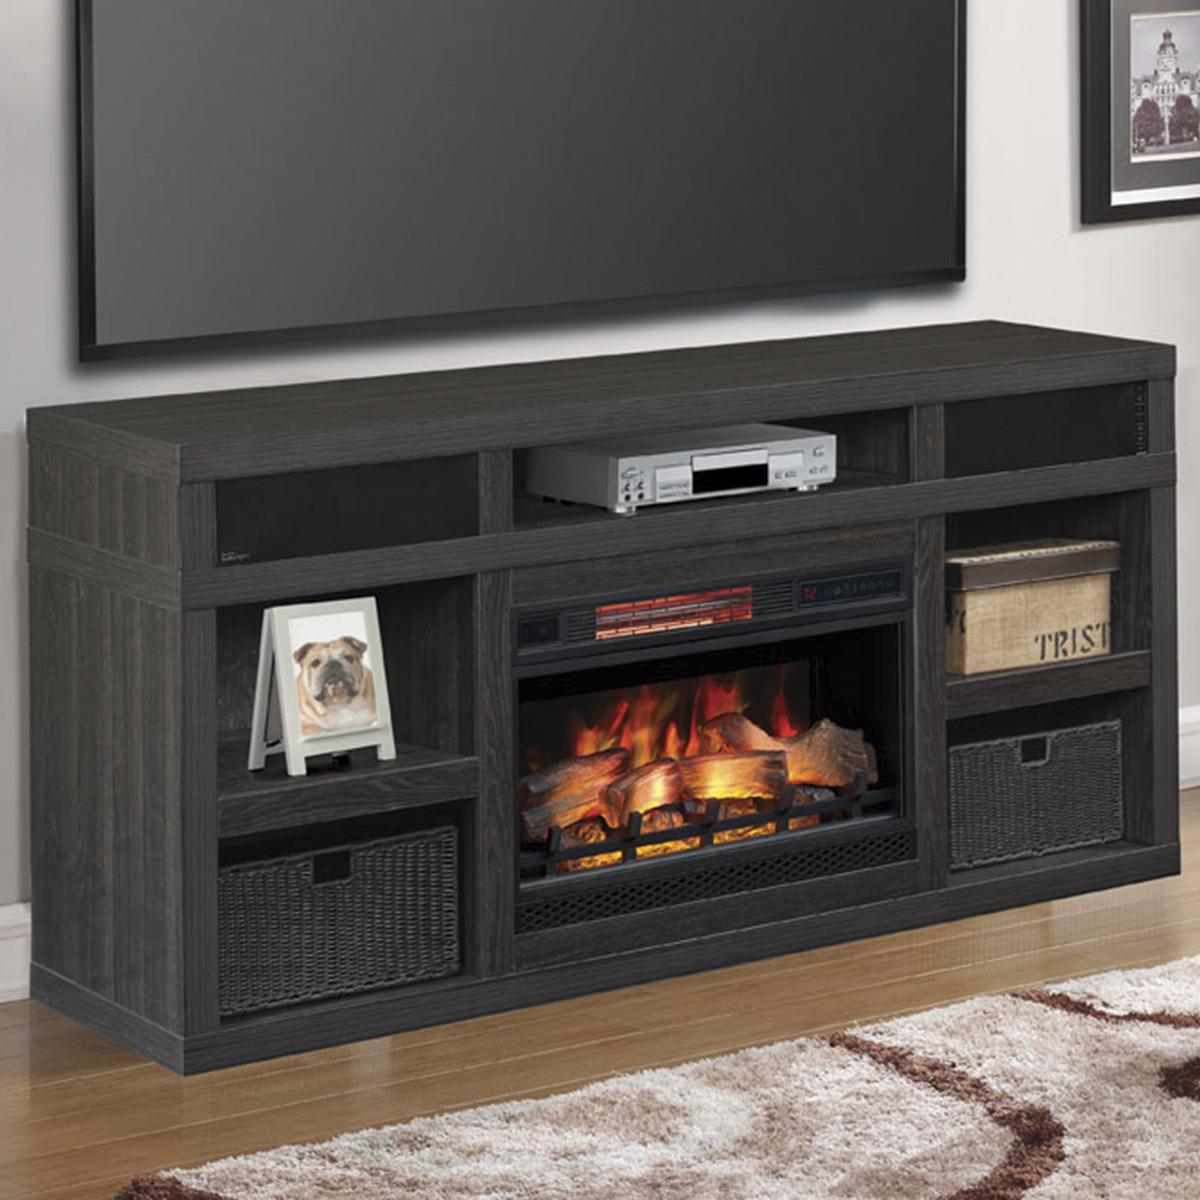 Fireplace Candle Insert Inspirational Fabio Flames Greatlin 64" Tv Stand In Black Walnut